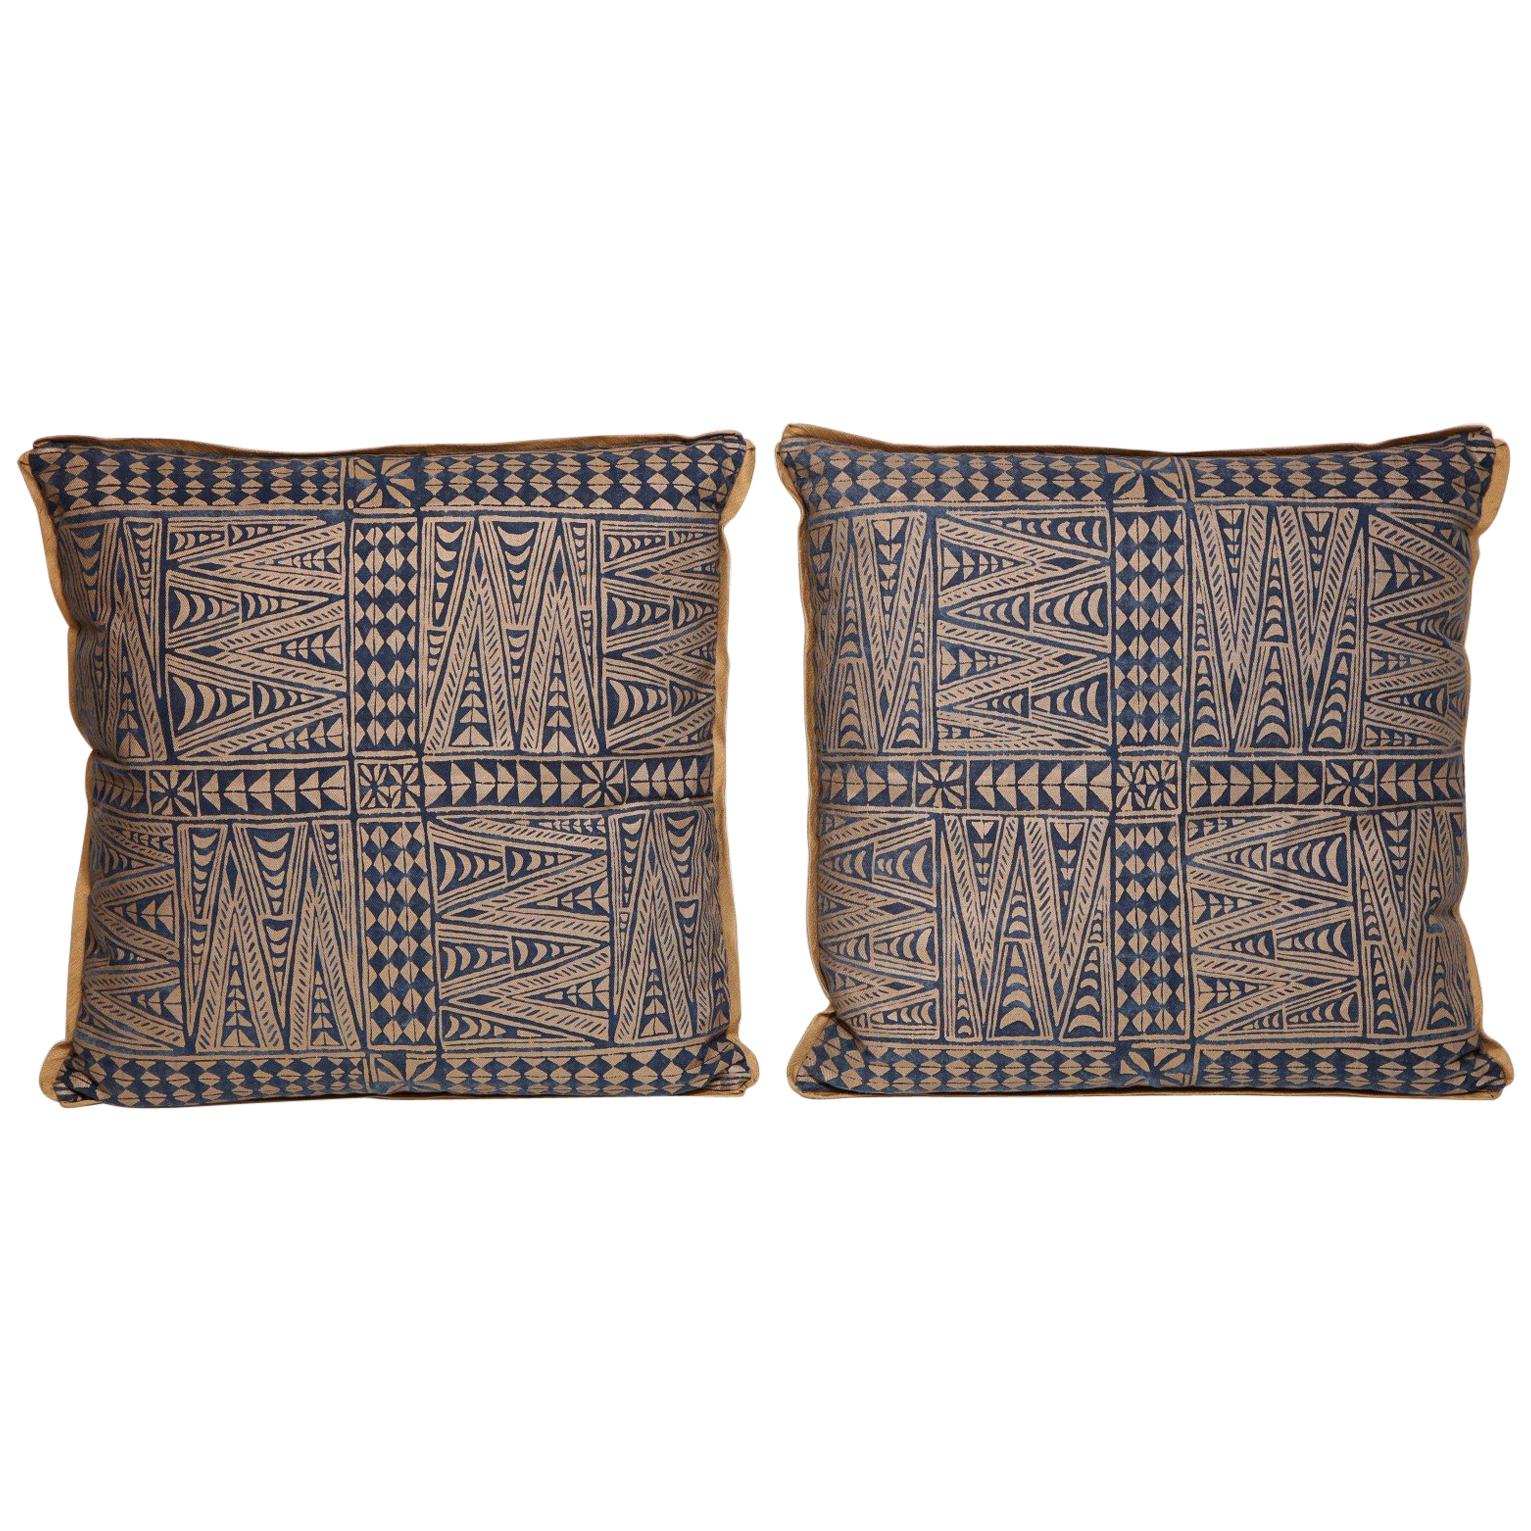 Pair of Fortuny Fabric Cushions in the Melilla Pattern 